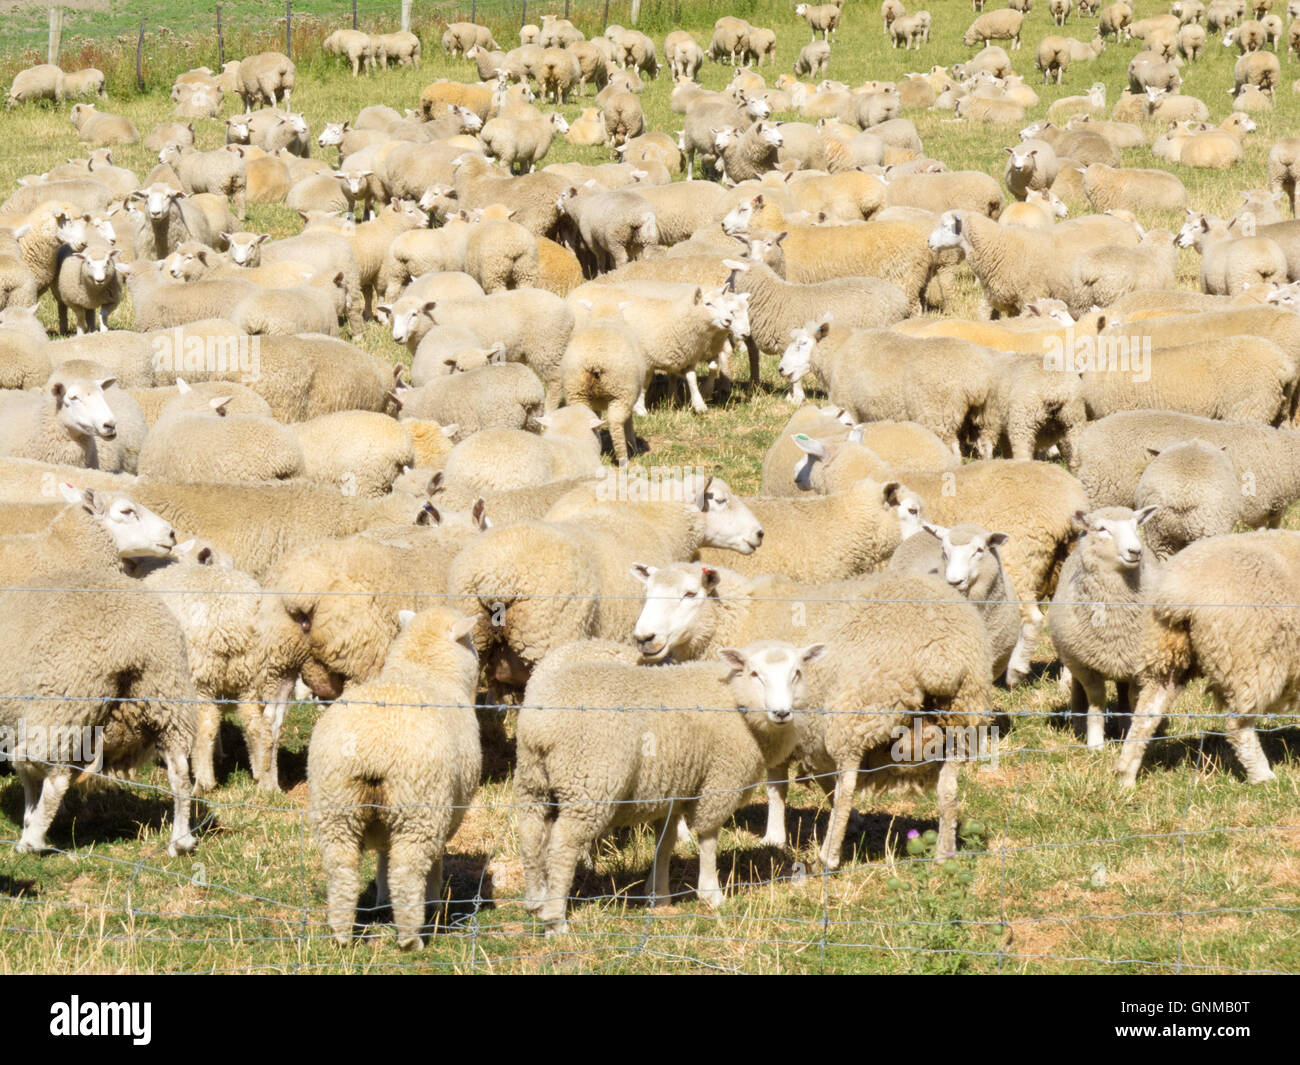 Flock of wool sheep close together in field Stock Photo